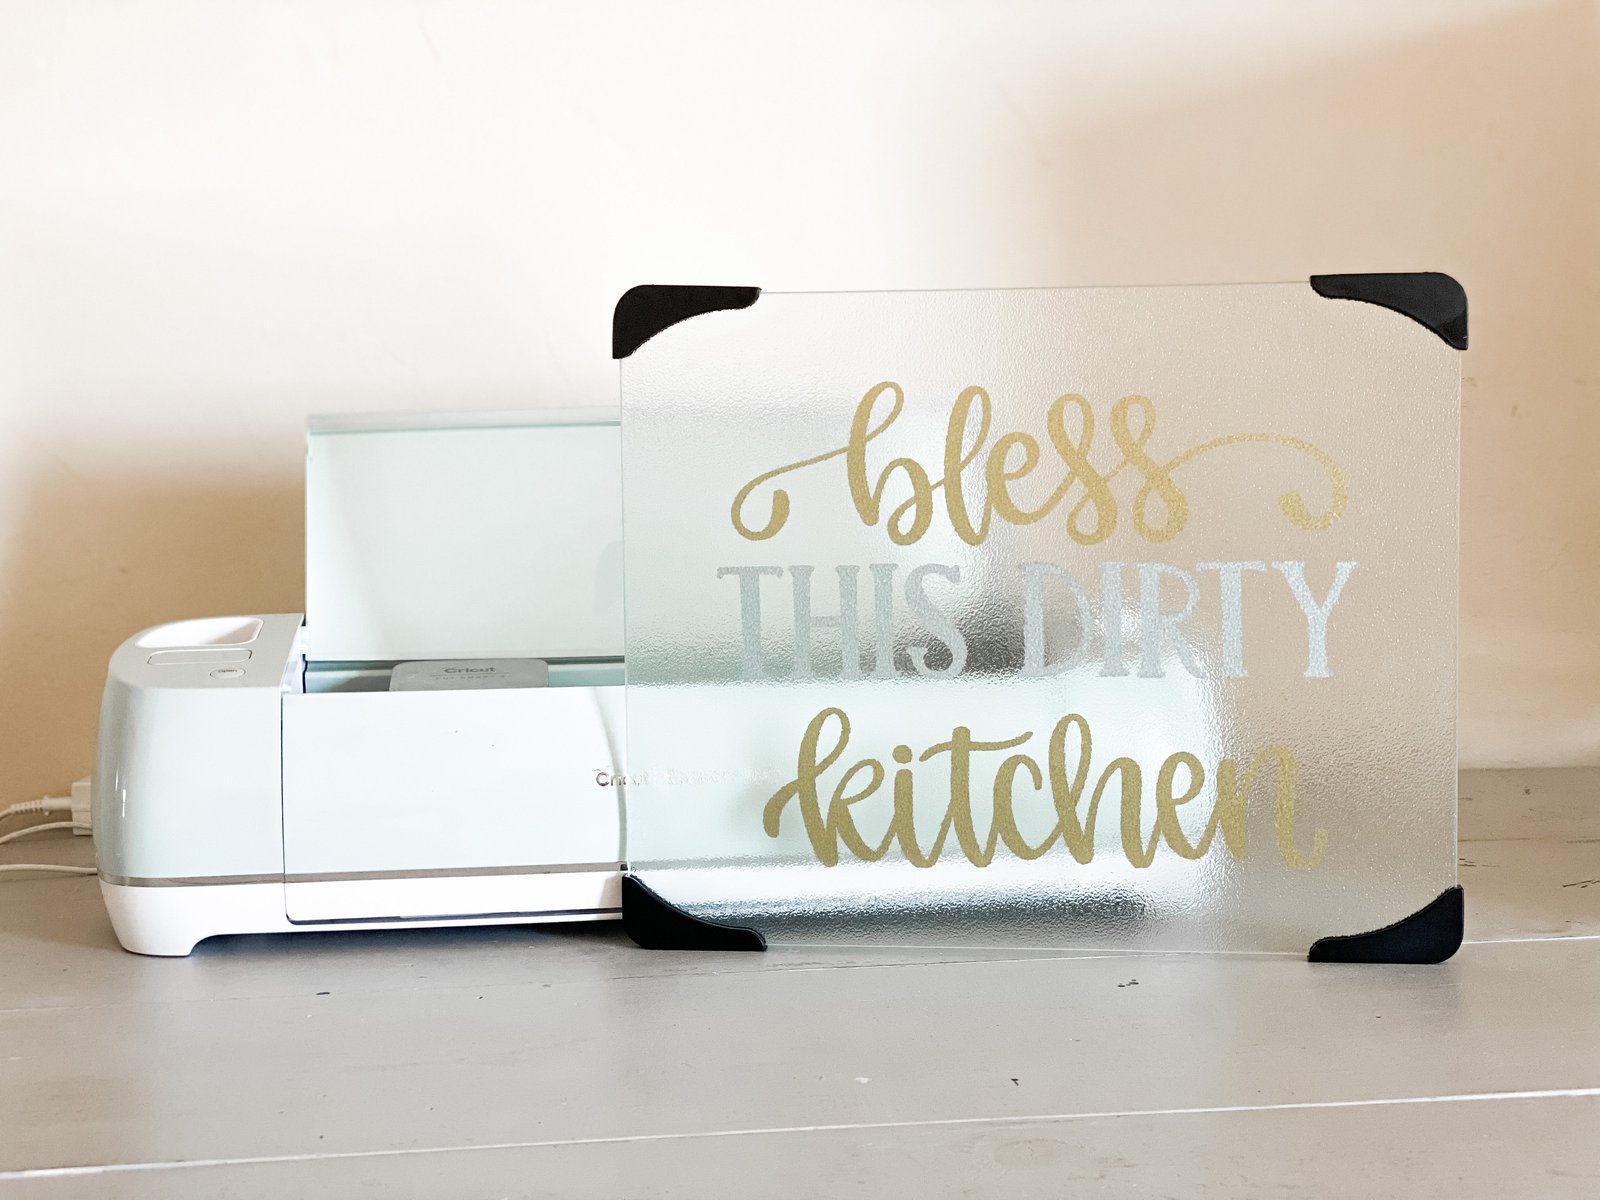 How to Make a Cricut Vinyl Decal for Cutting Board